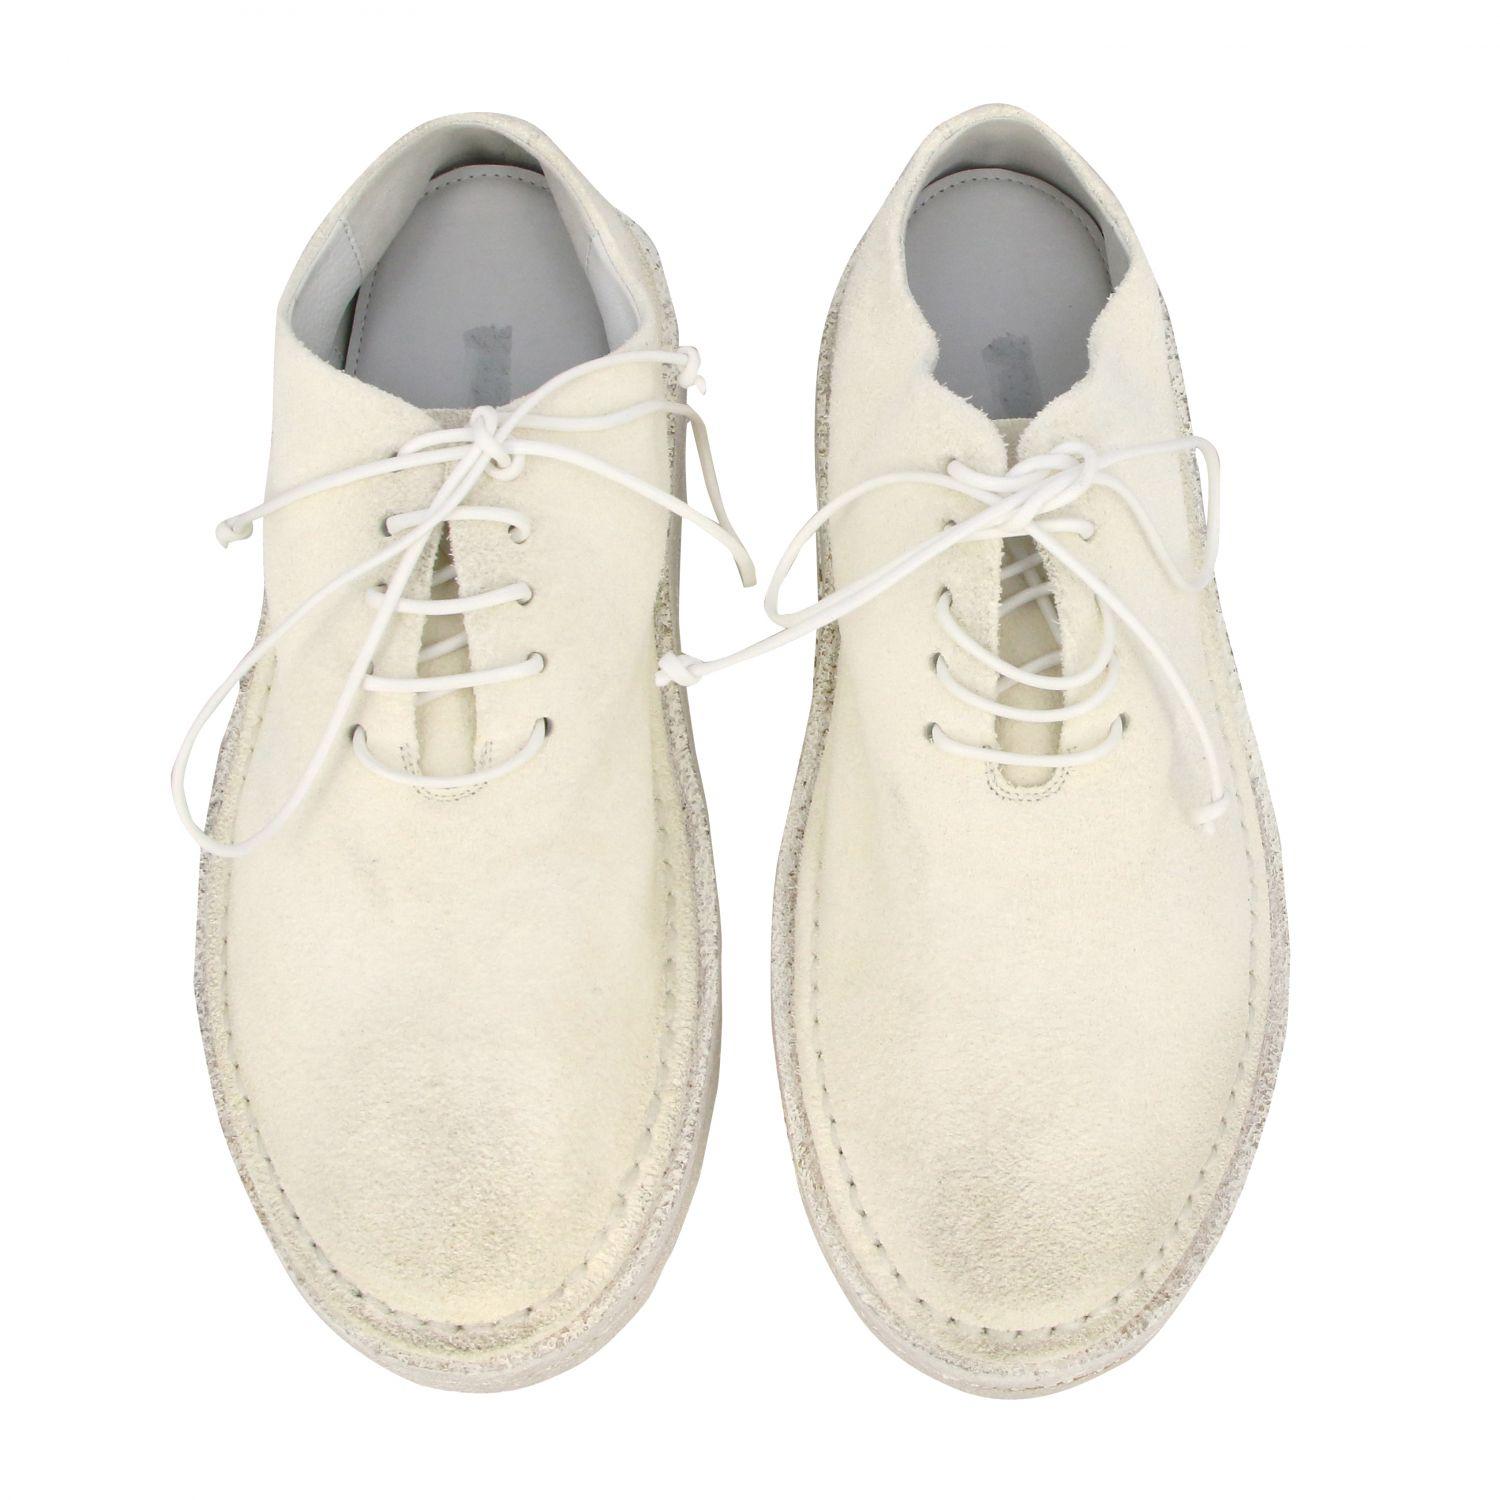 Marsèll Leather Sancrispa Laced Shoe In Suede in White for Men - Lyst